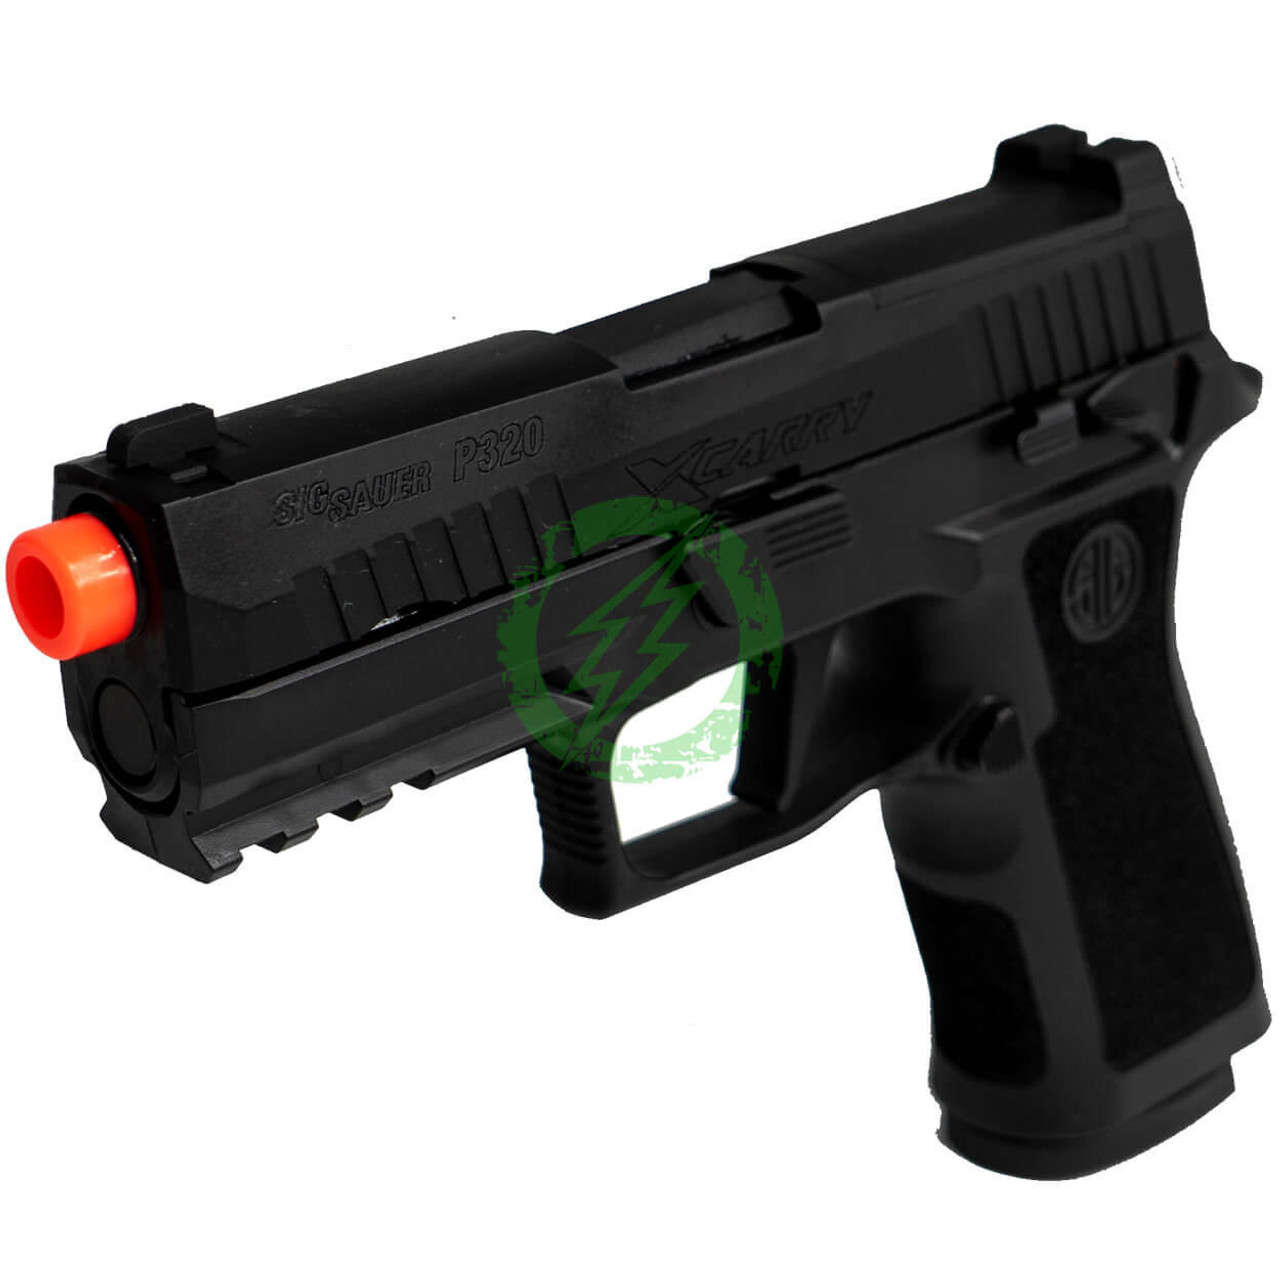  SIG Airsoft PROFORCE P320 XCARRY GBB Airsoft Pistol 